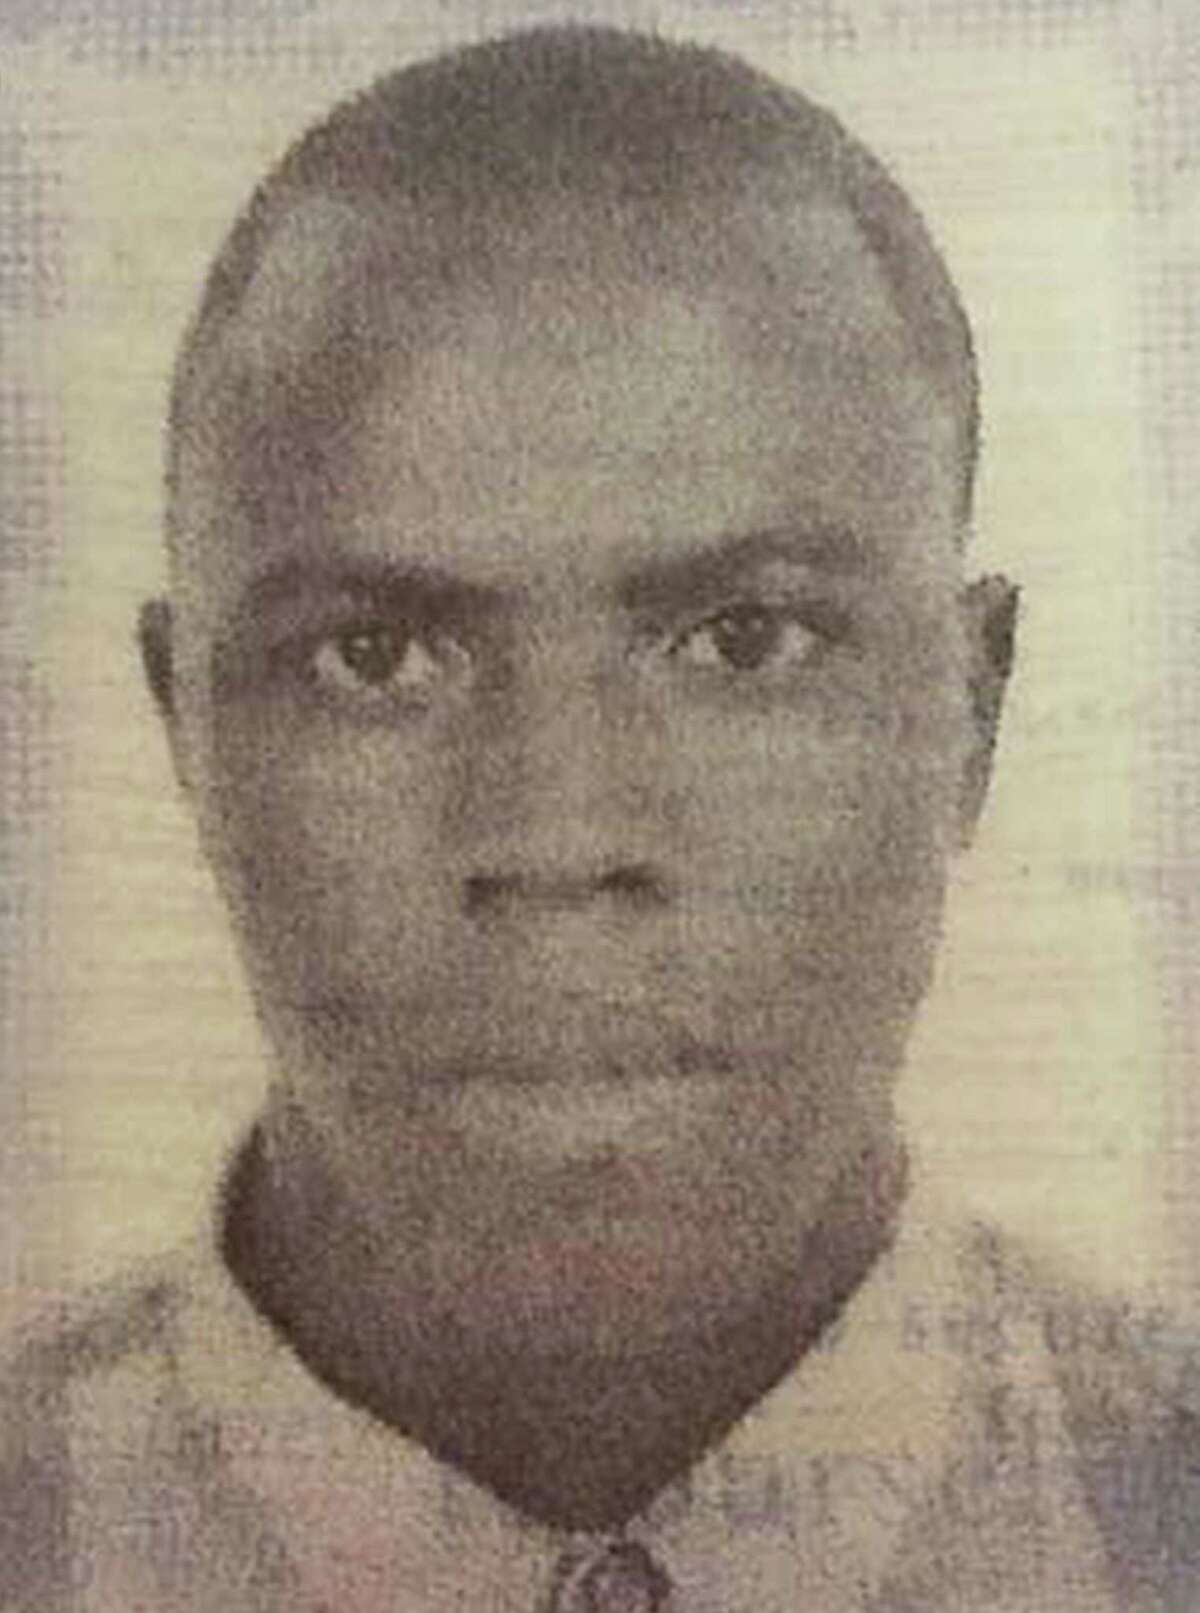 This undated passport photo released by the Inglewood Police Department shows missing Special Olympics athlete Abidjan Ouattara, originally from the Ivory Coast. Ouattara vanished near Los Angeles on Monday.